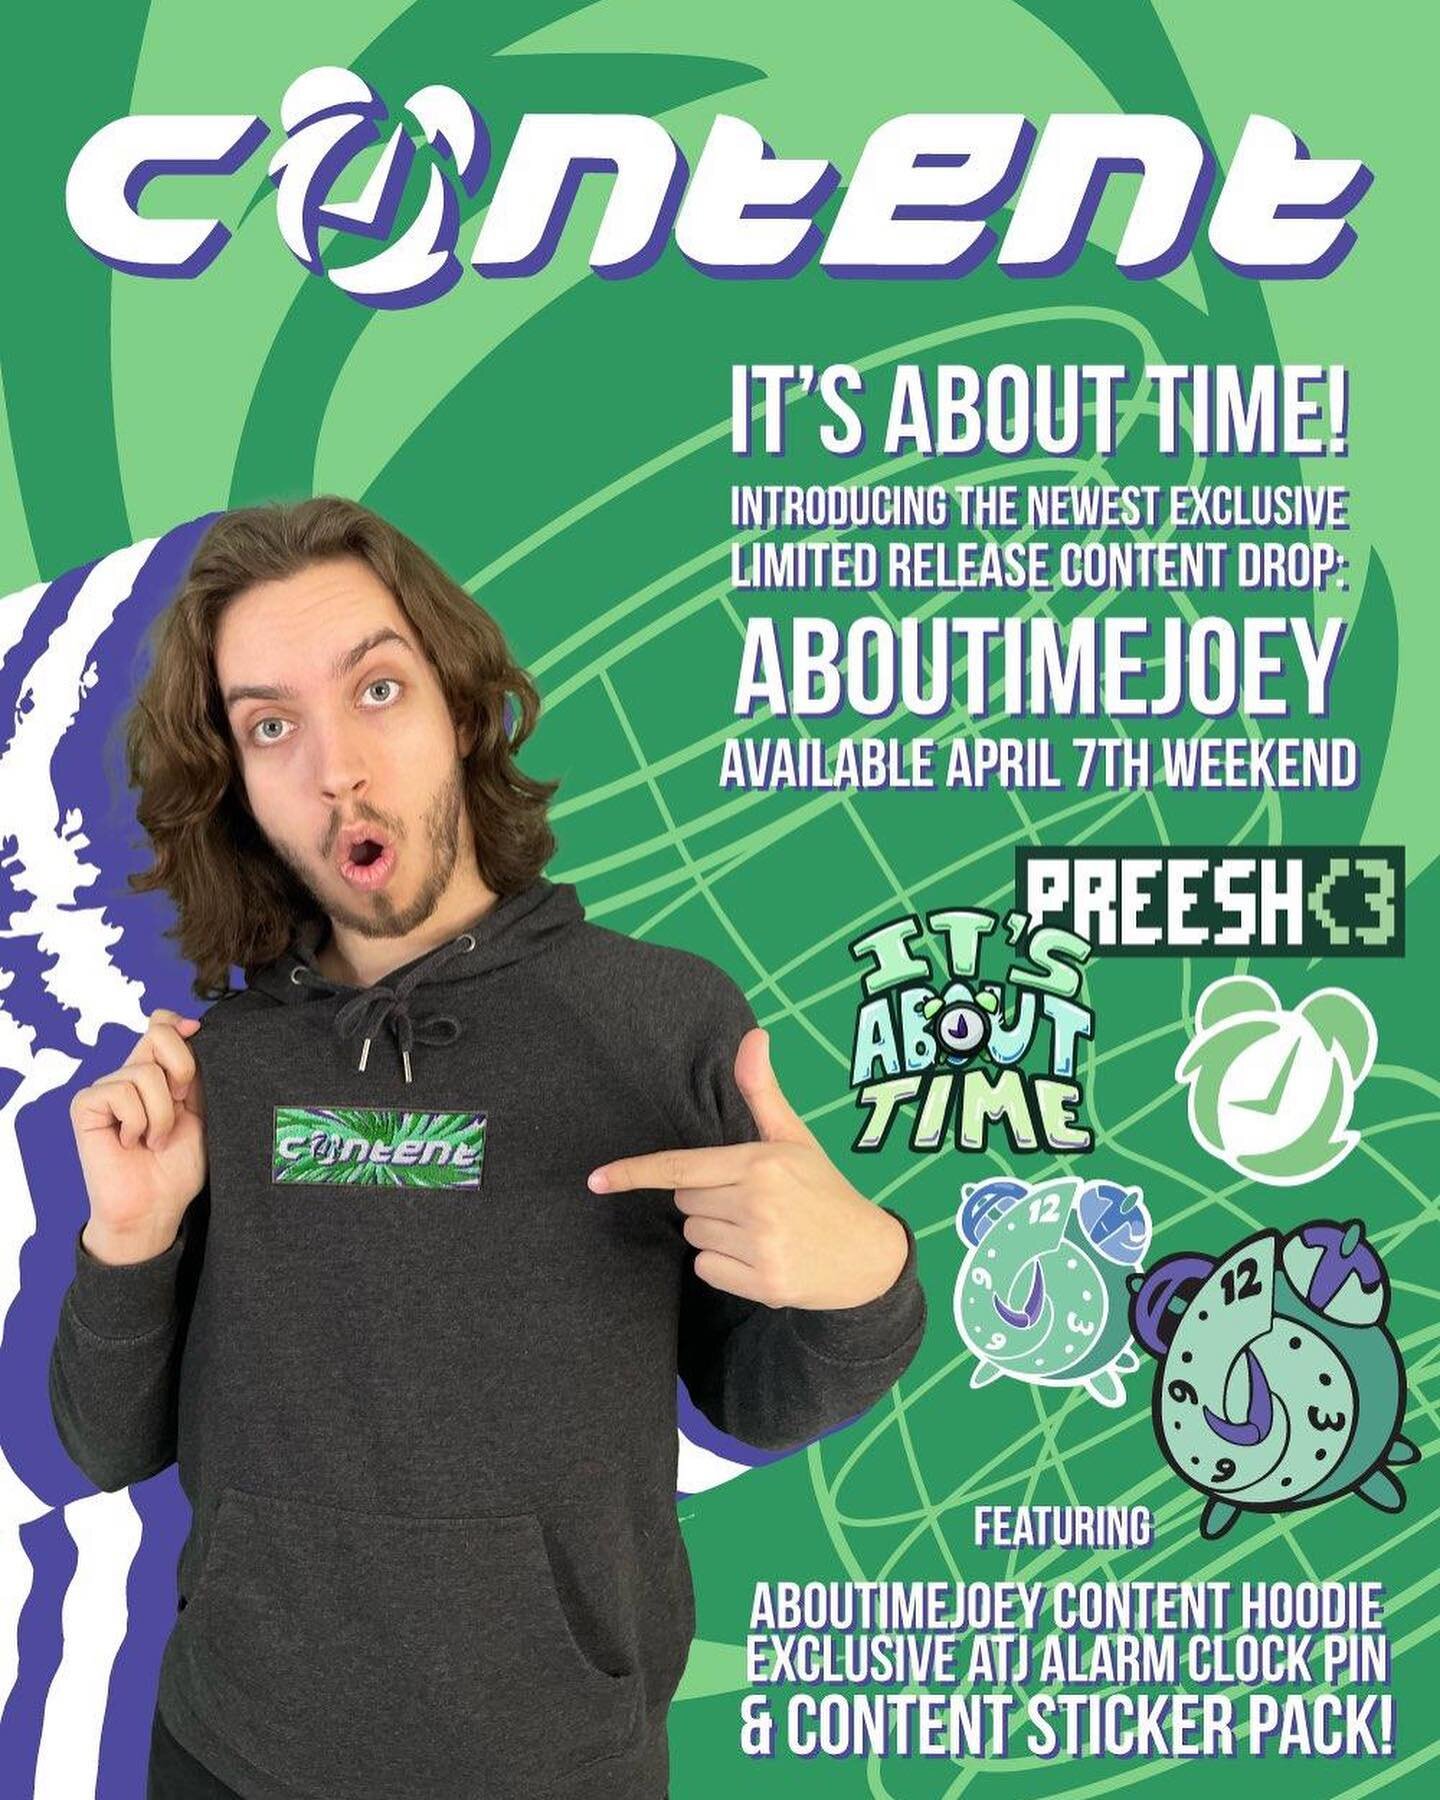 Check out the @aboutimejoey x @contentmerch drop available this weekend only! Pins, sticker packs, and premium hoodies, all available now! 
#content #contentcreator #contentmerch #merch #aparrel